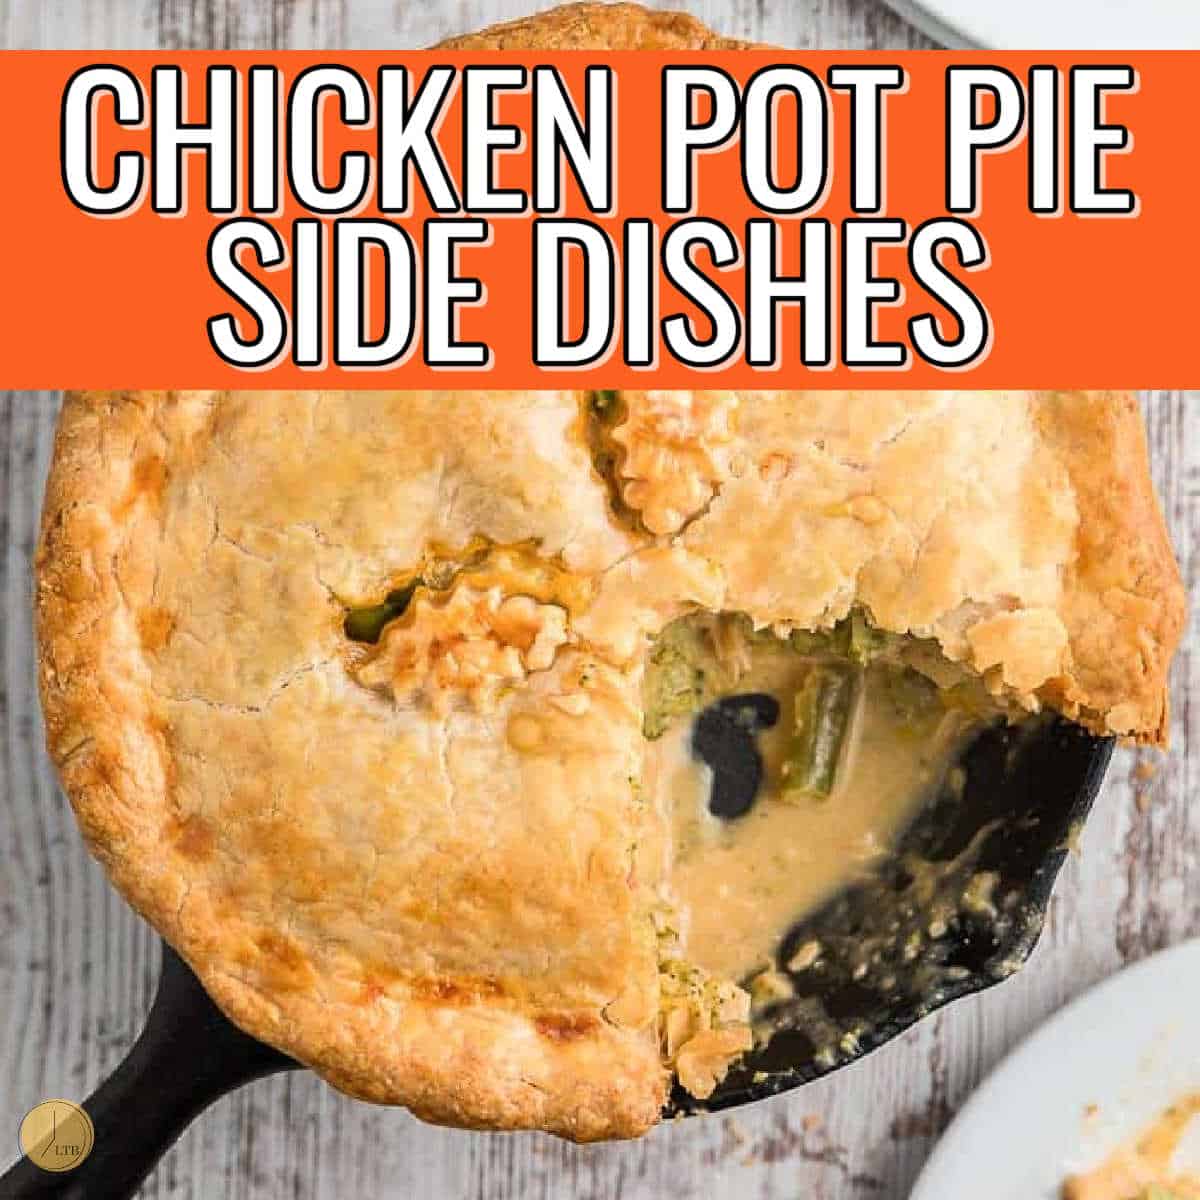 A chicken pot pie in a skillet with text "chicken pot pie side dishes" on the top.